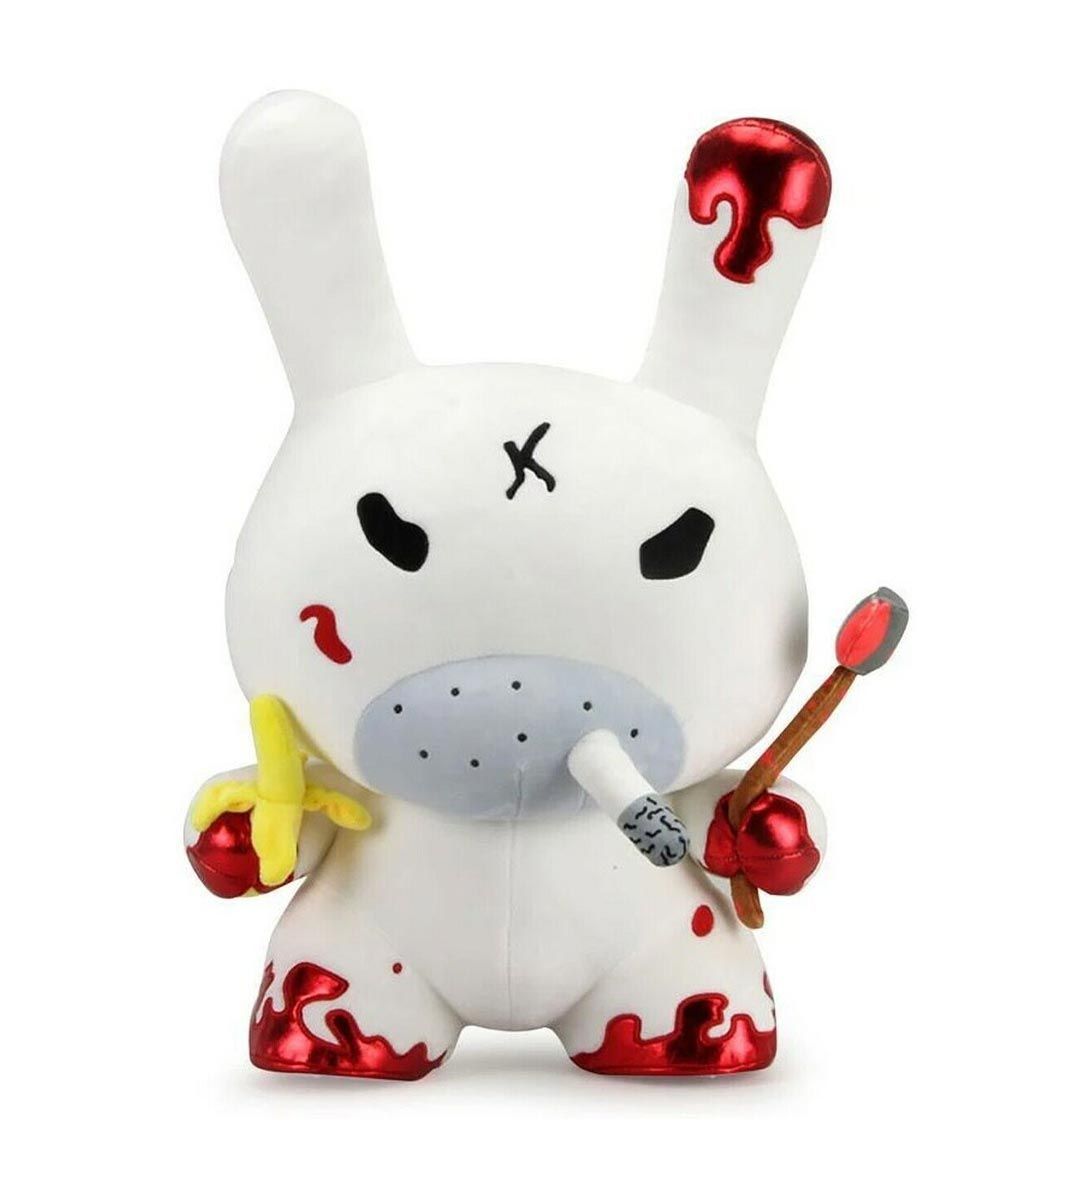 20" Dunny-Plush - Dunny Redrum